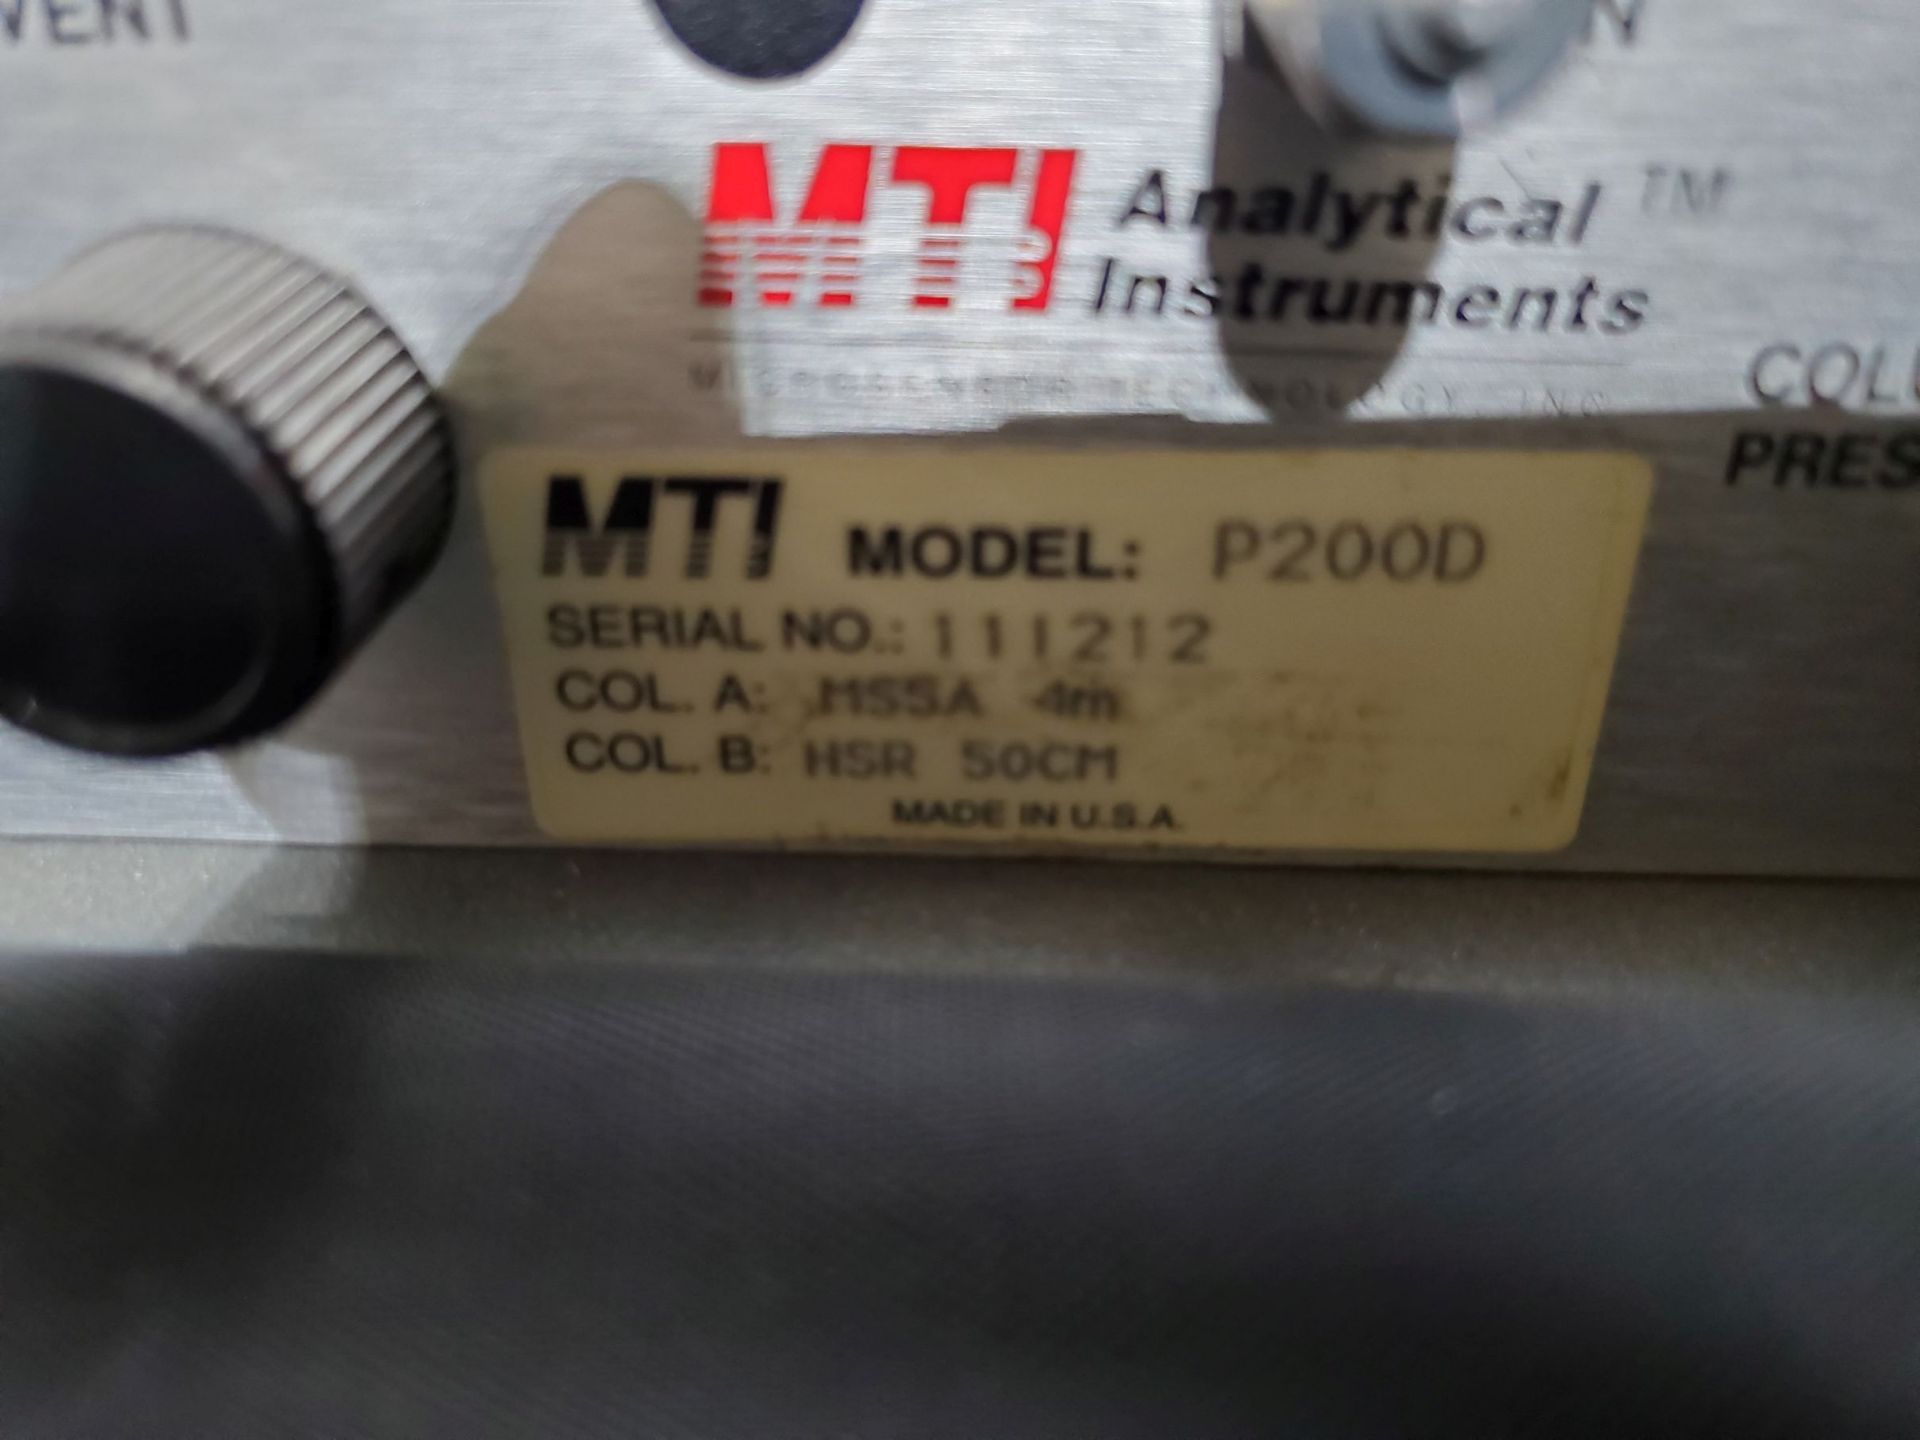 MTI Portable Gas Chromatograph, model PS200H serial number 111212, 2 Column, with manuals, control - Image 3 of 6